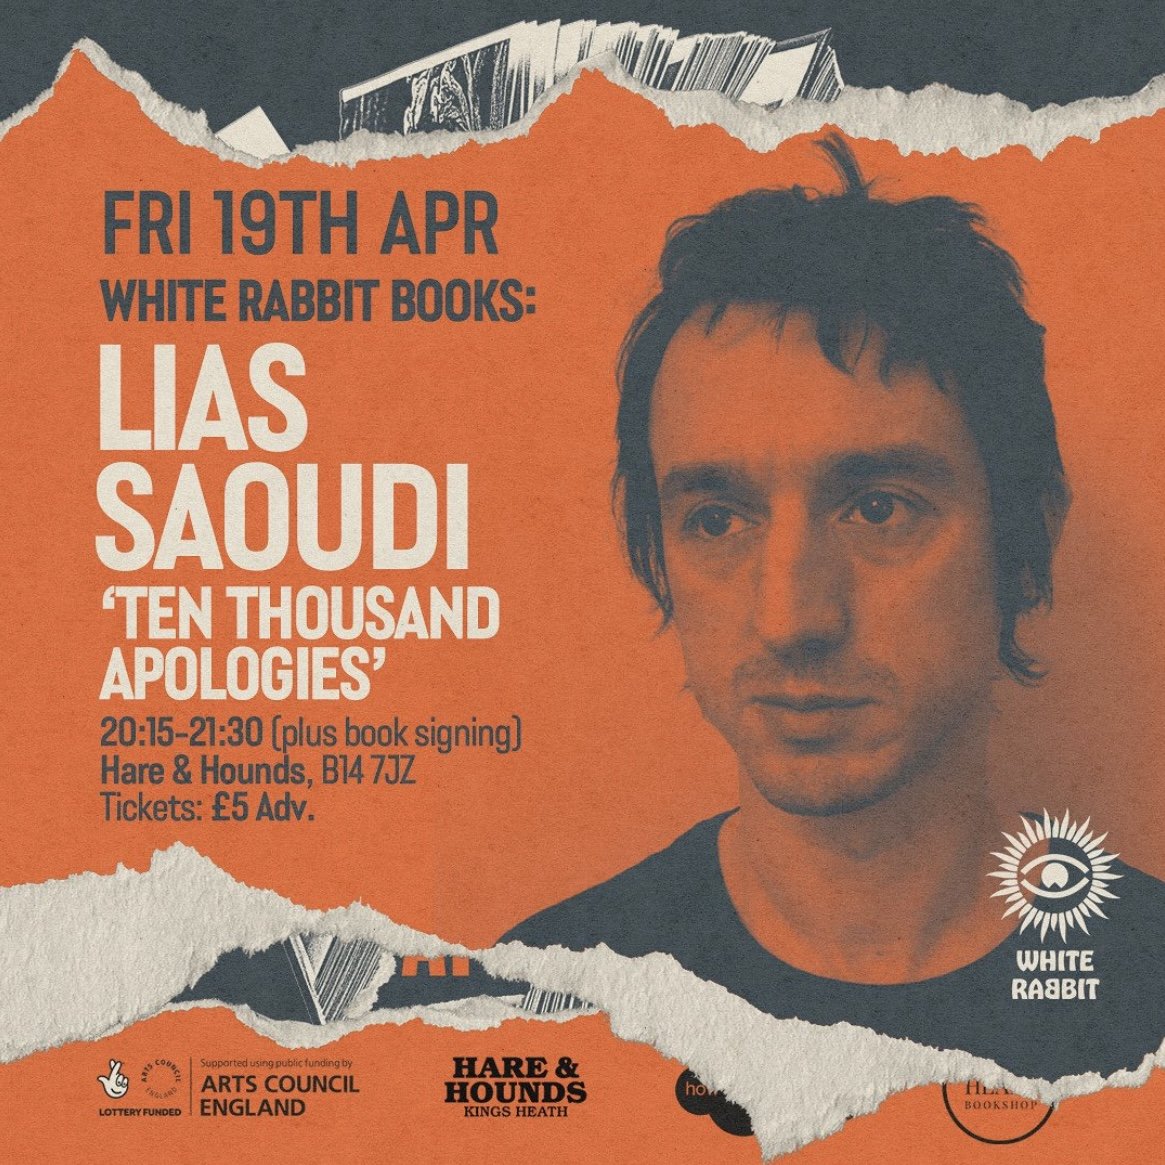 This Friday night we're heading to Birmingham for a double header with @MrRichardNorris and Lias Saoudi, as part of the Heath Bookshop's new festival with @hareandhounds They'll both be in conversation with @DanielDylanWray and then signing copies 👉 the-heath-bookshop.eventcube.io